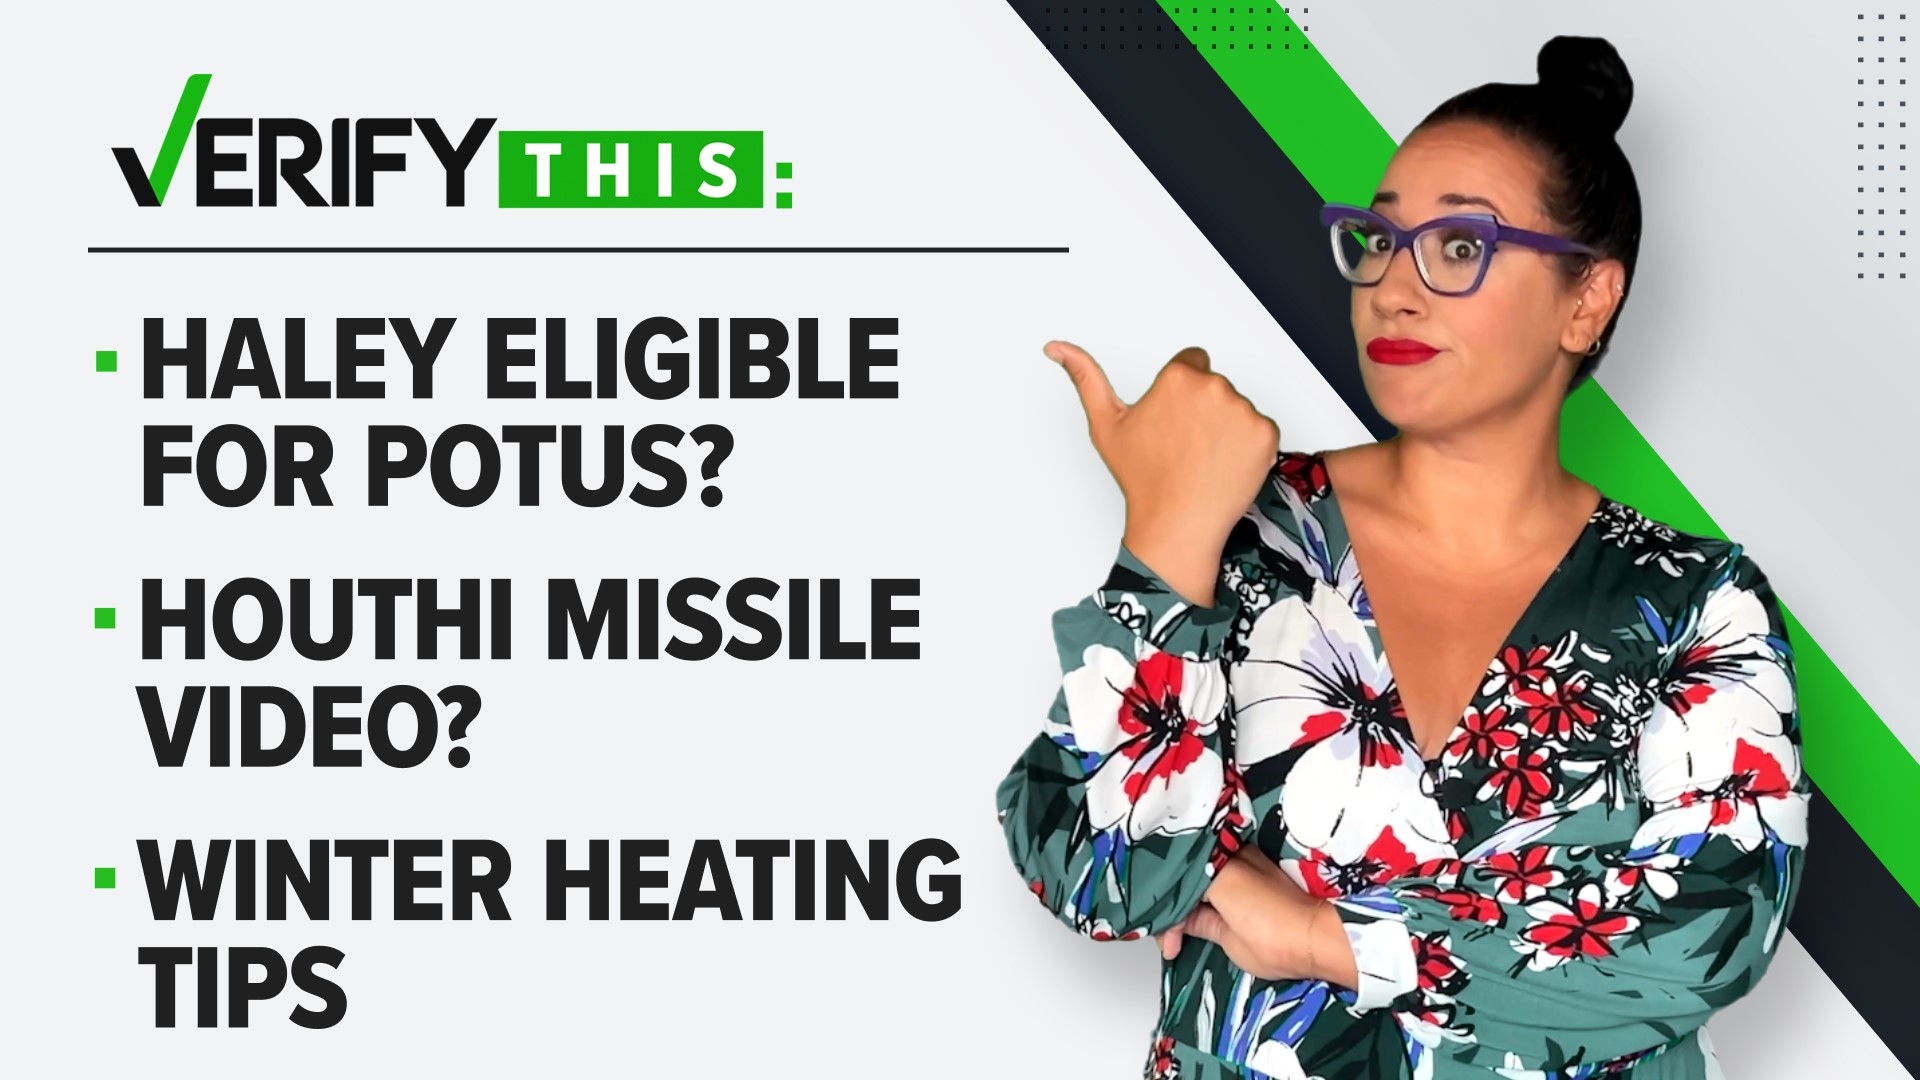 In this episode, we look into claims that Nikki Haley could be ineligible to run for president & we fact check a video claiming to be from the Houthi missile attack.